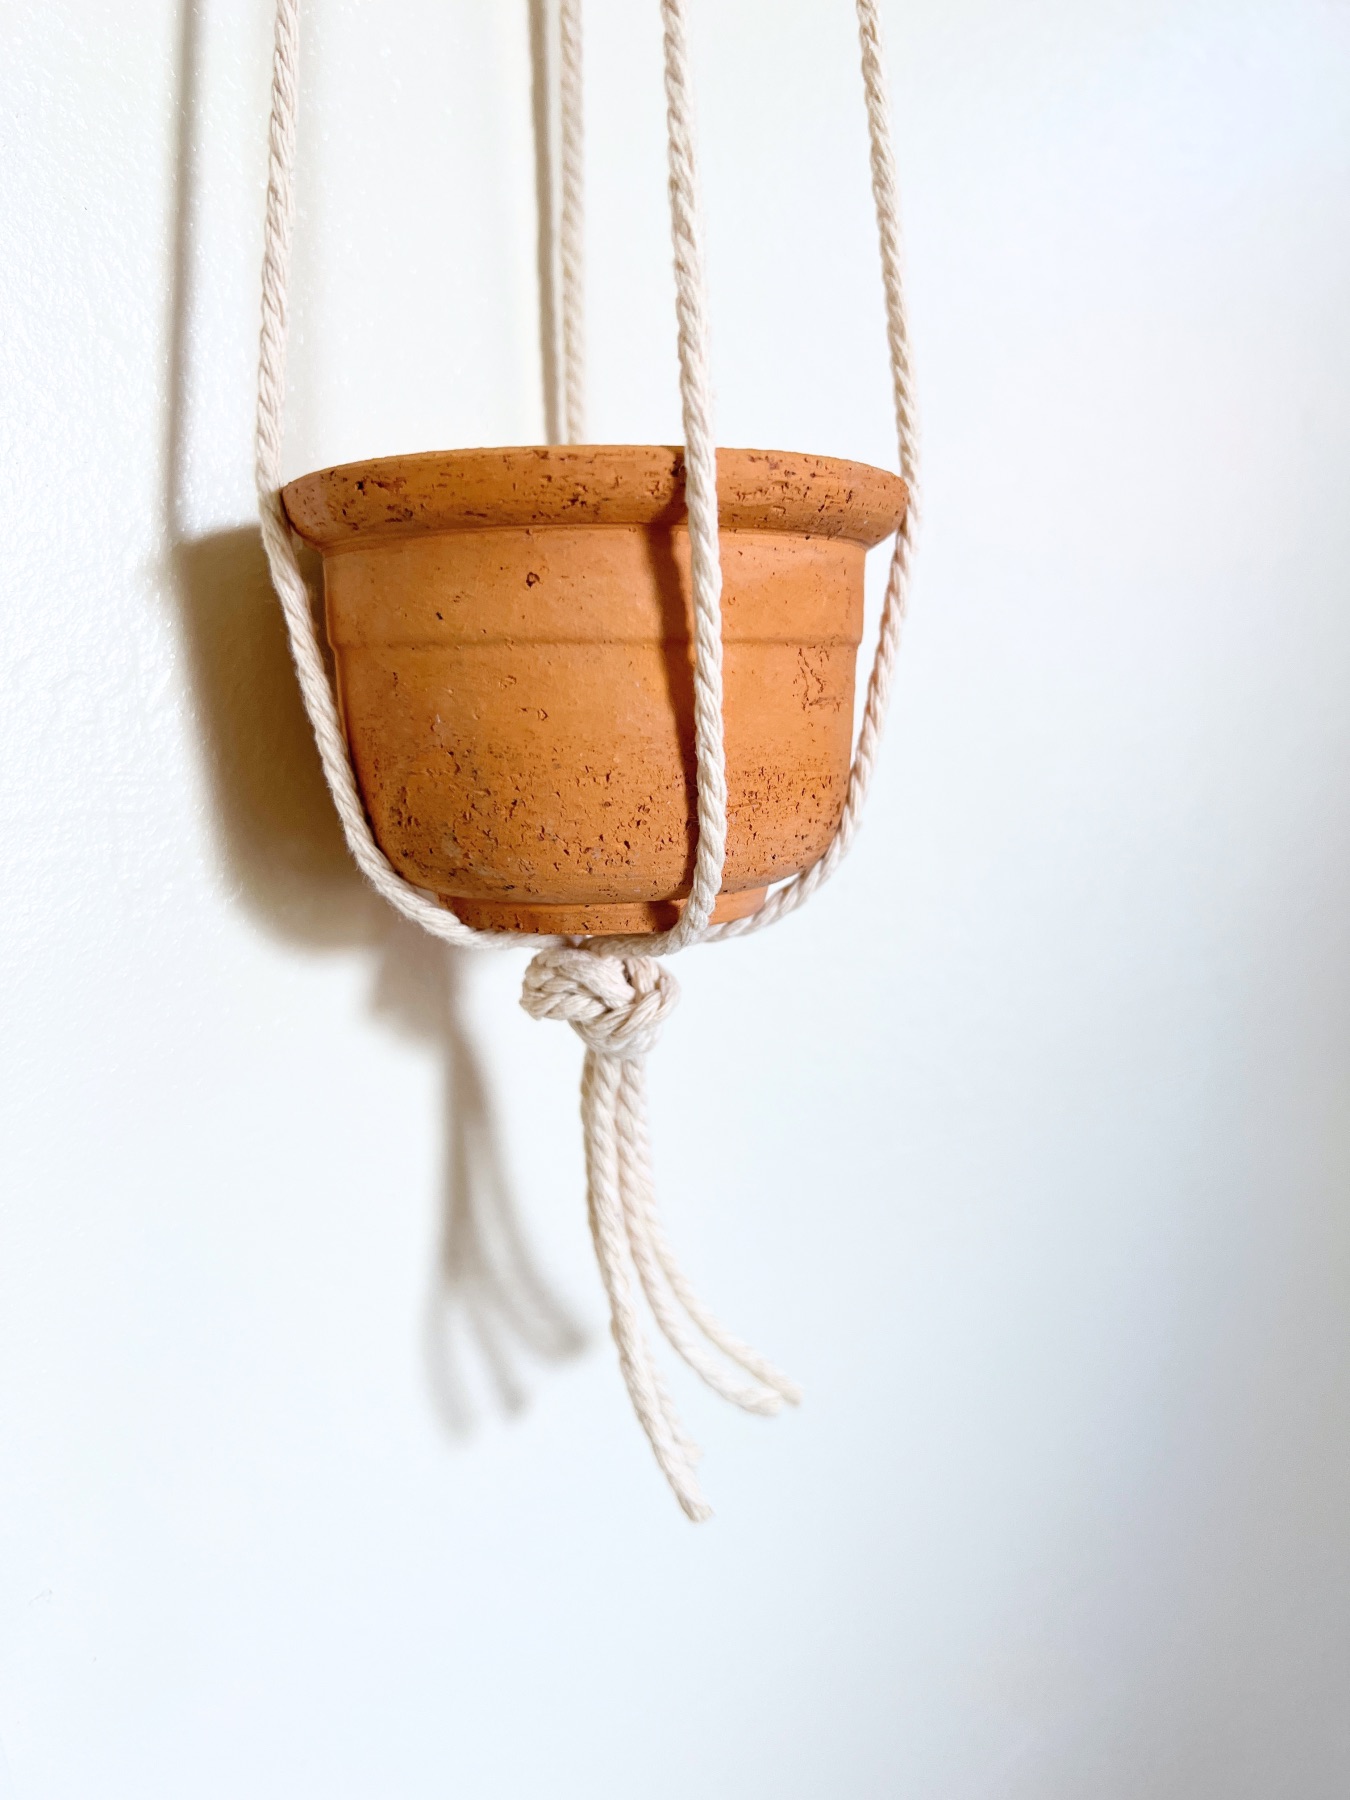 finished macrame hanging planter ready for plants